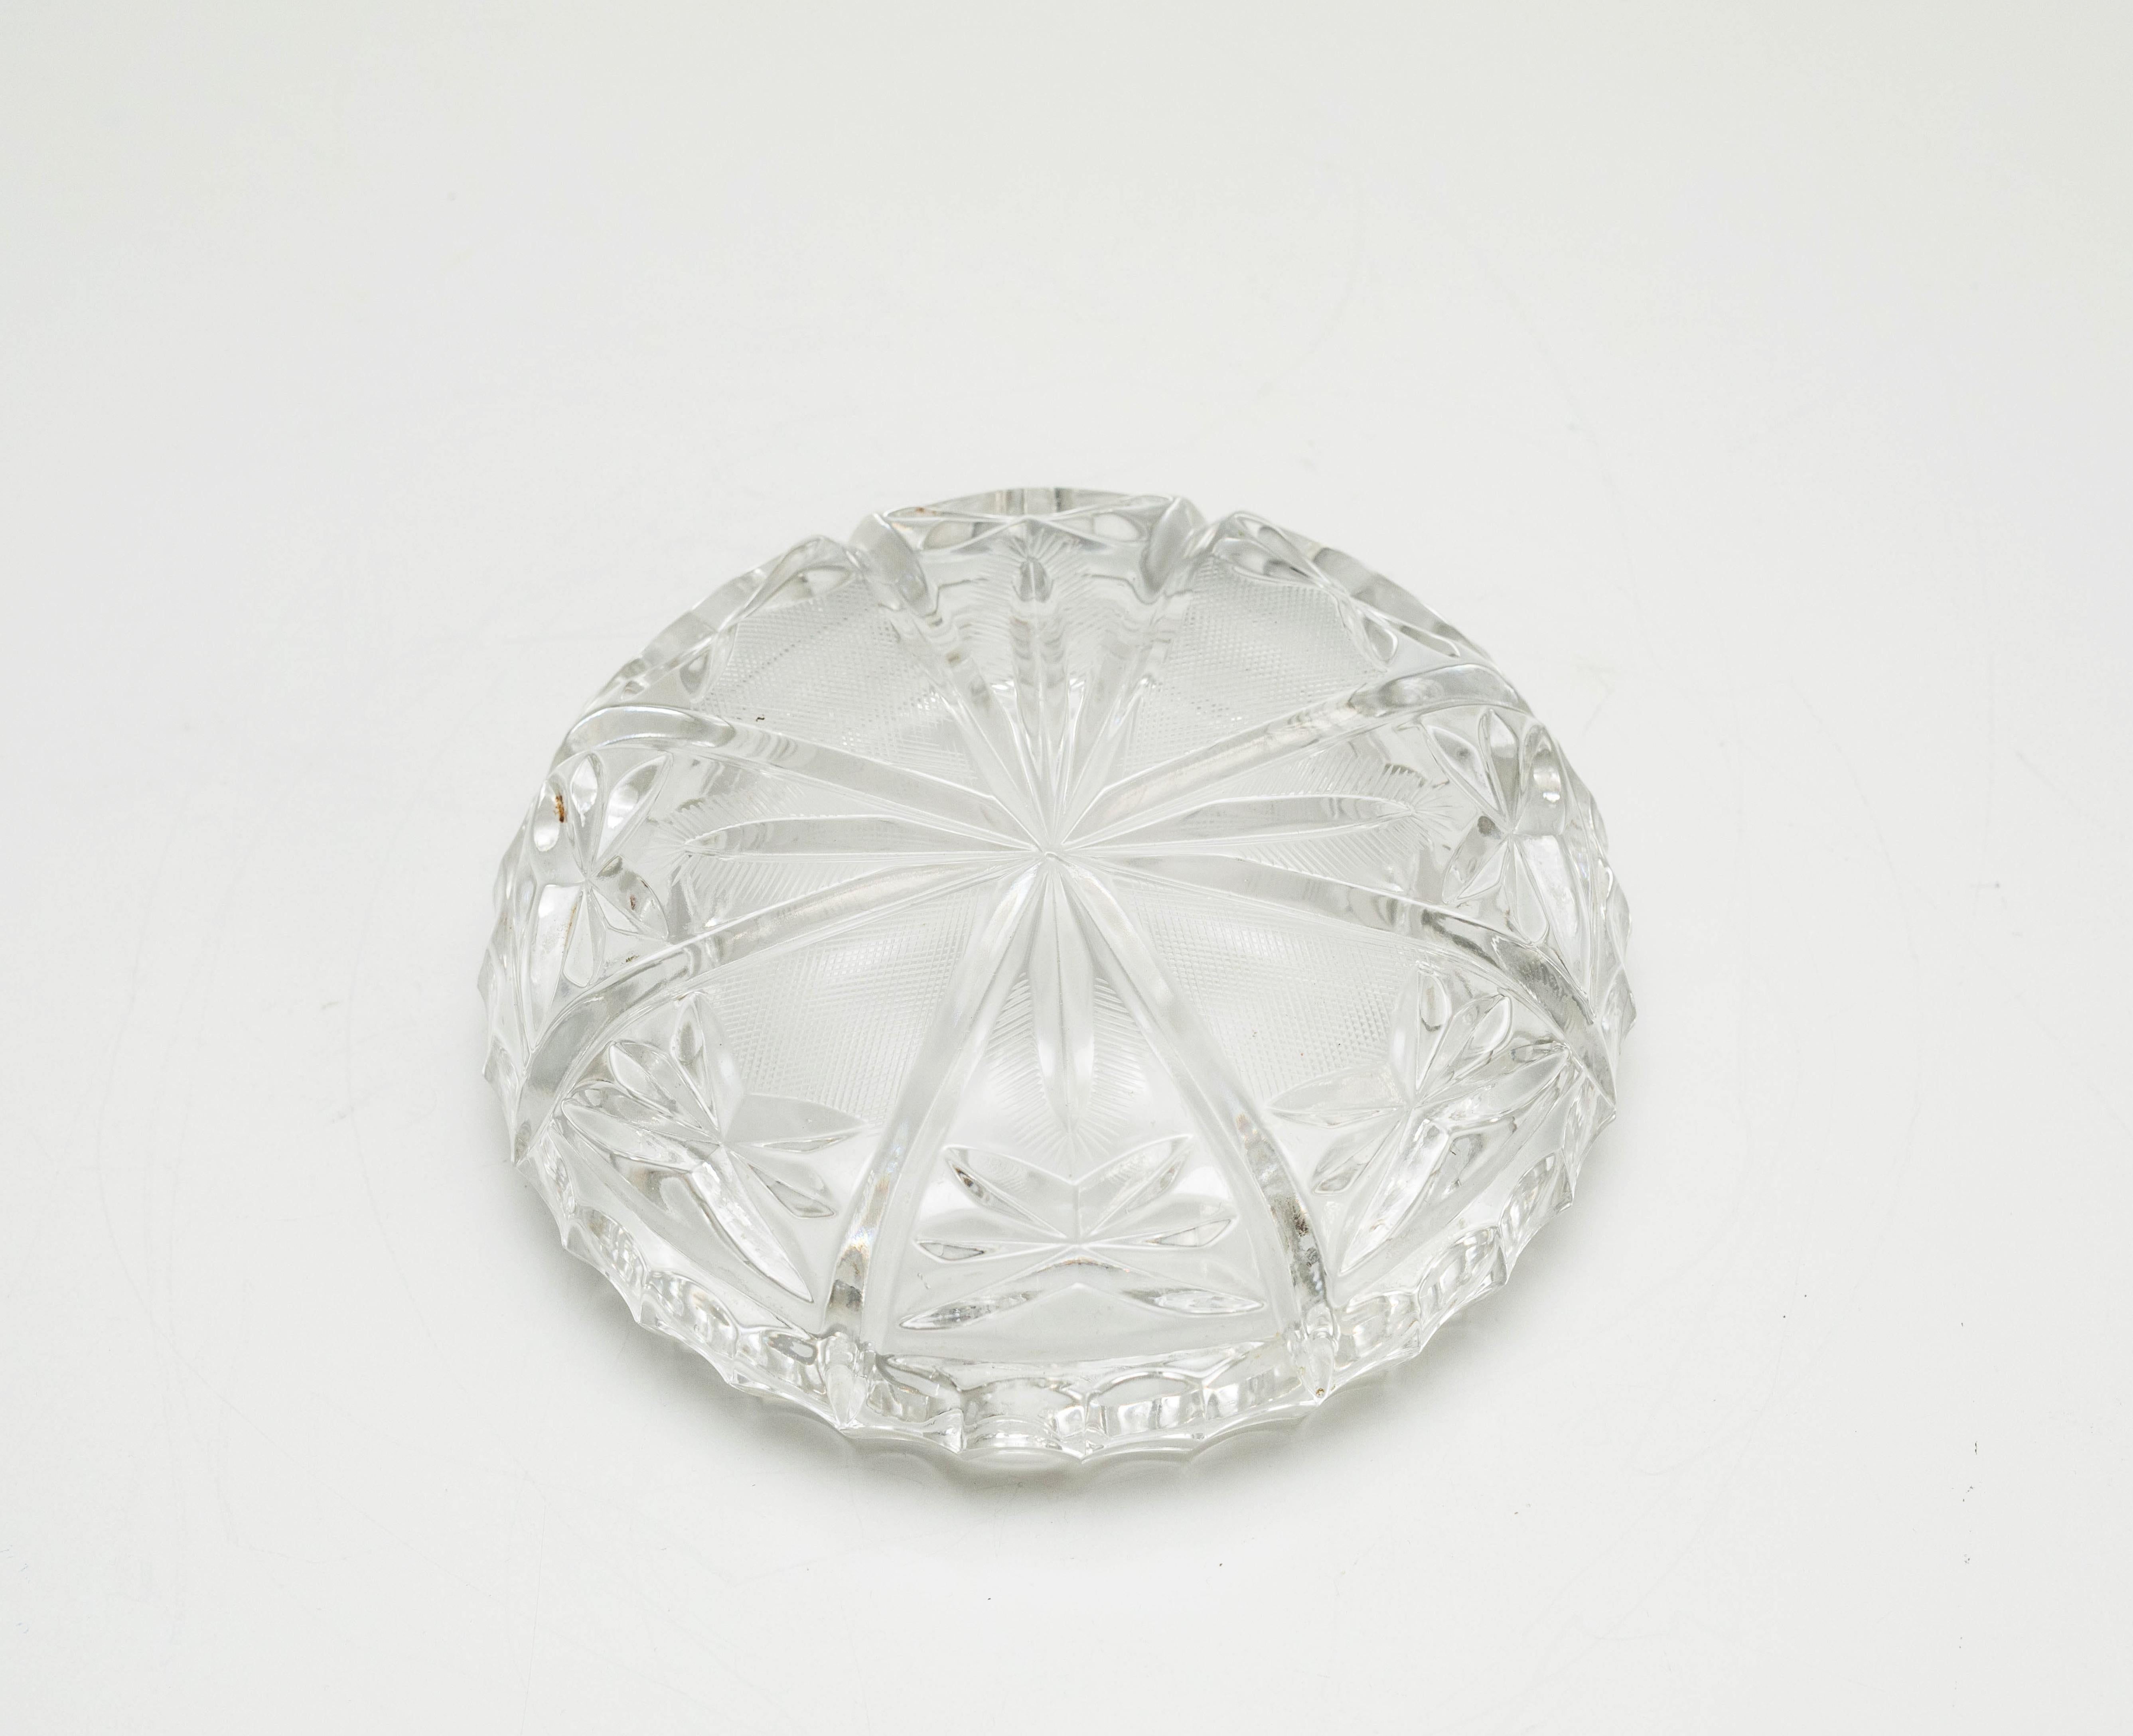 Other Early 20th Century Crystal Ashtray